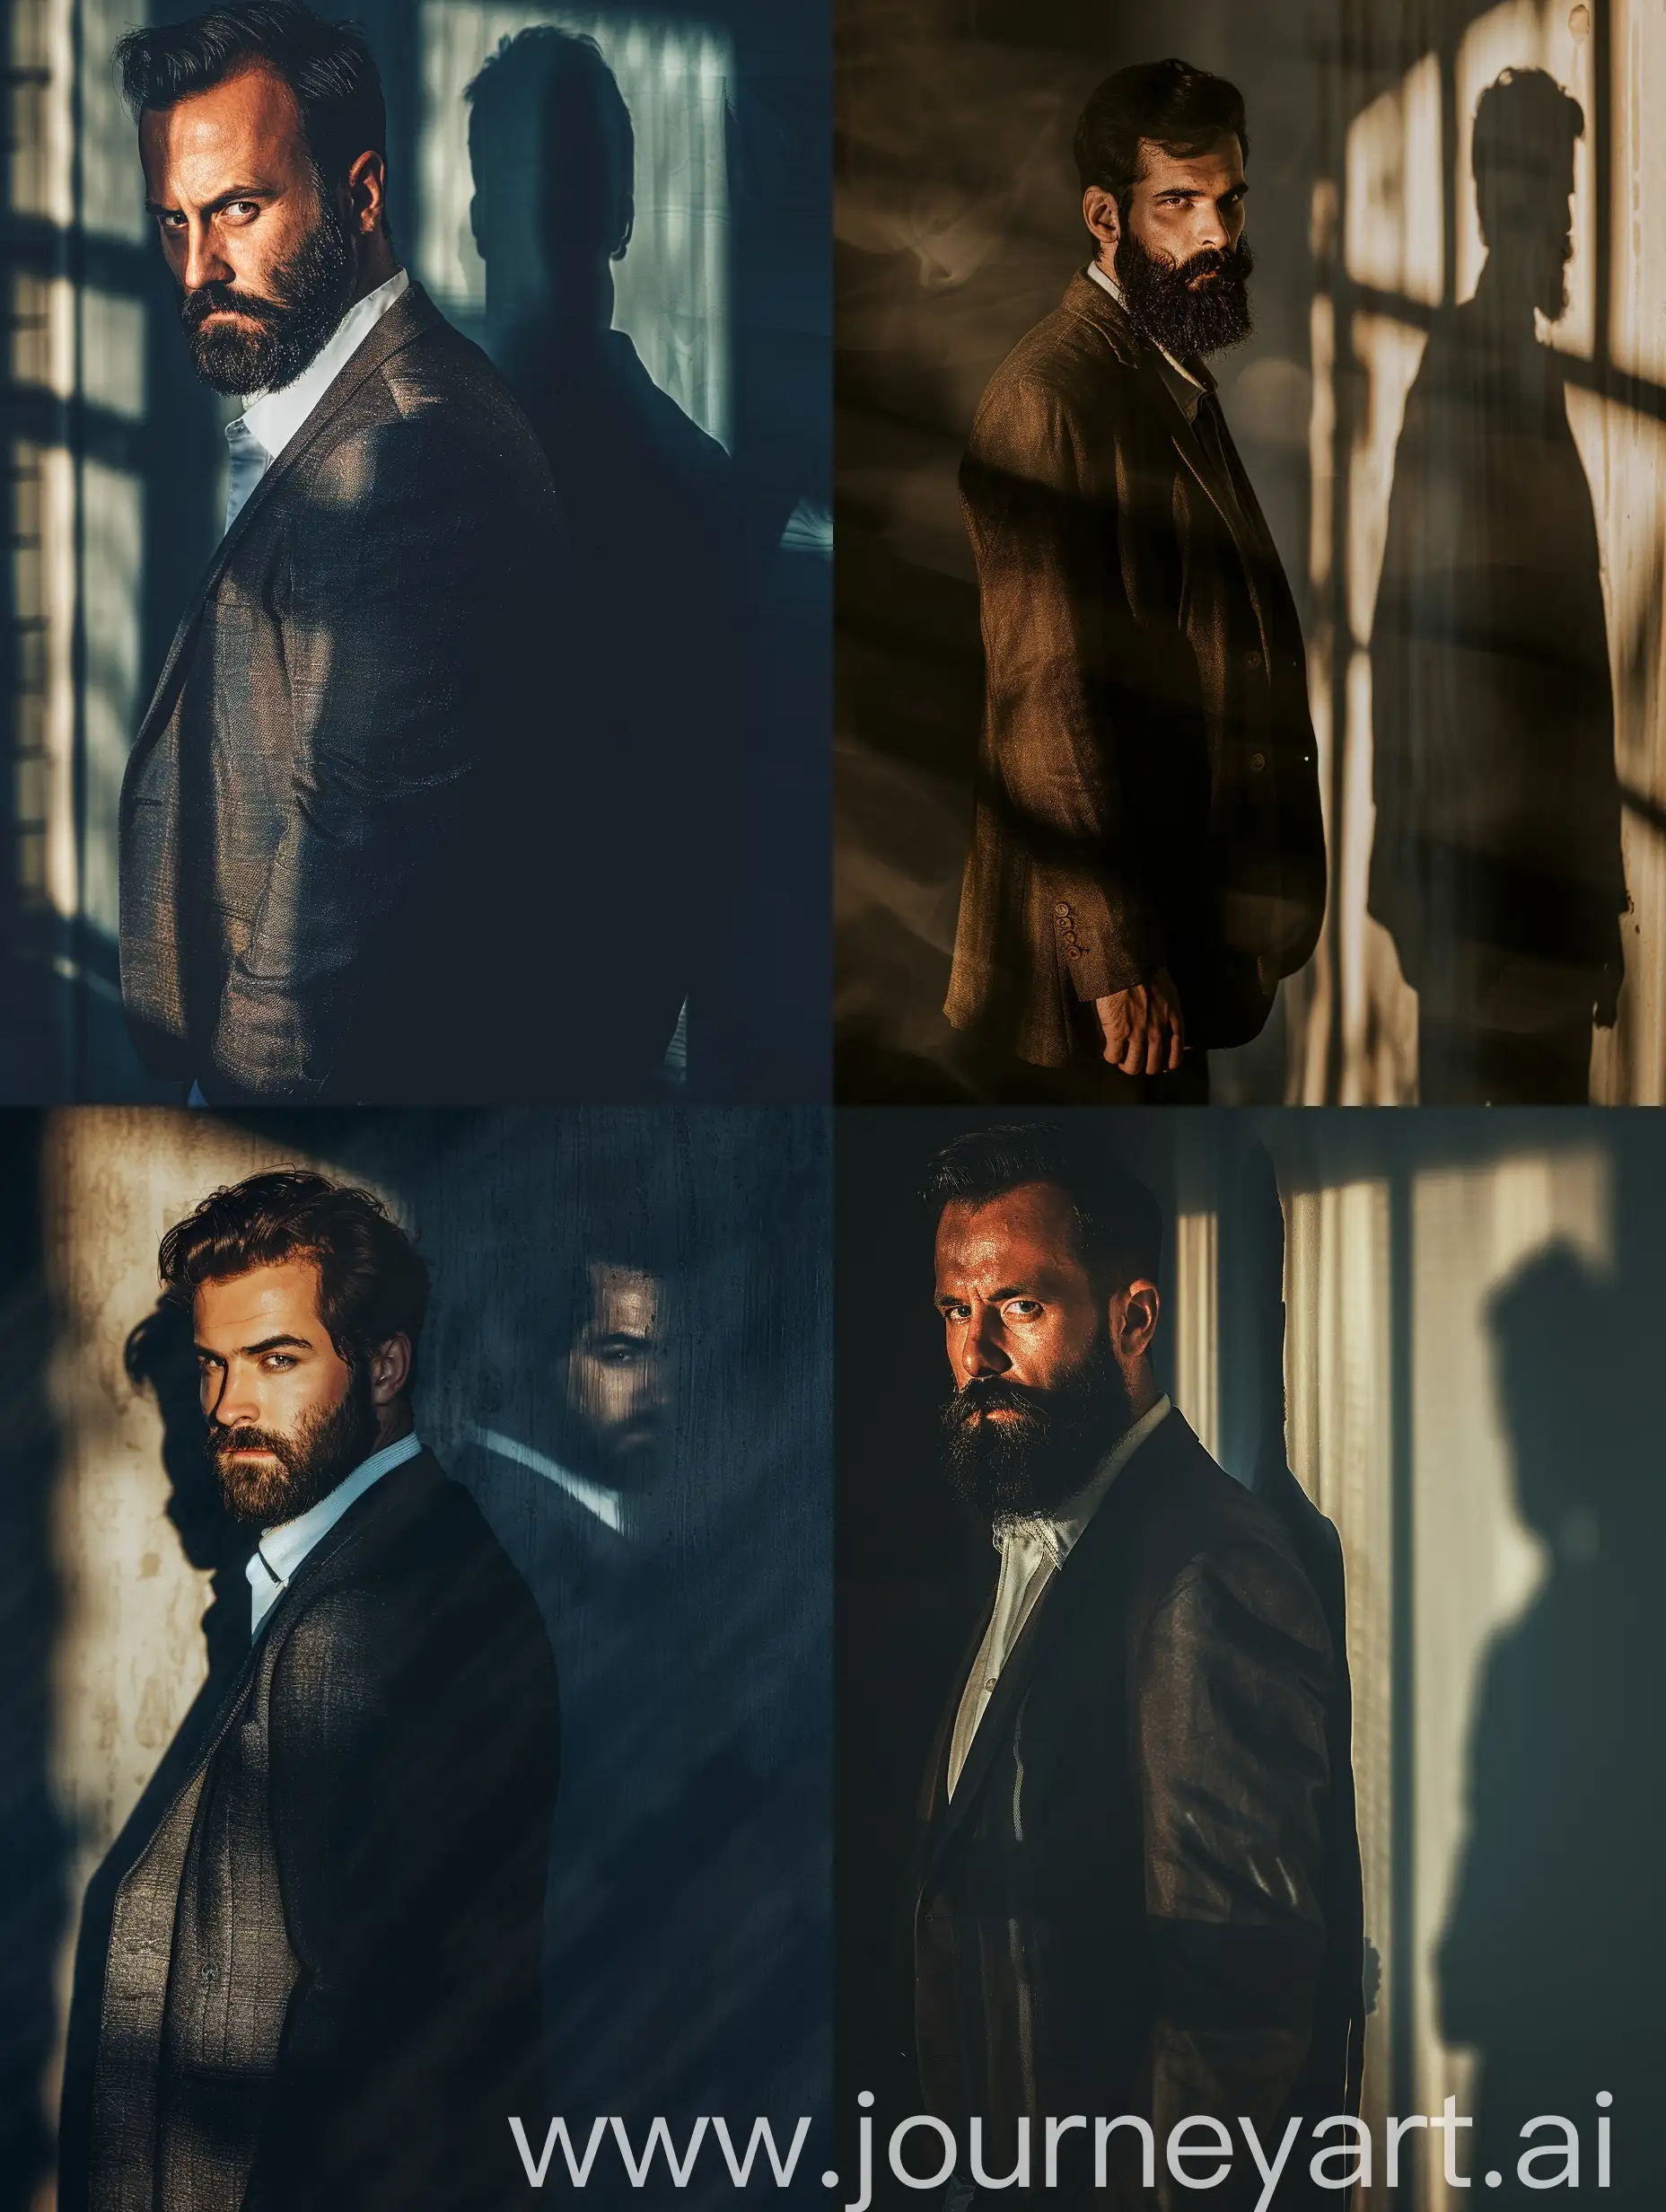 Man-with-Beard-Standing-in-Cinematic-Light-Dark-Setting-and-Formal-Attire